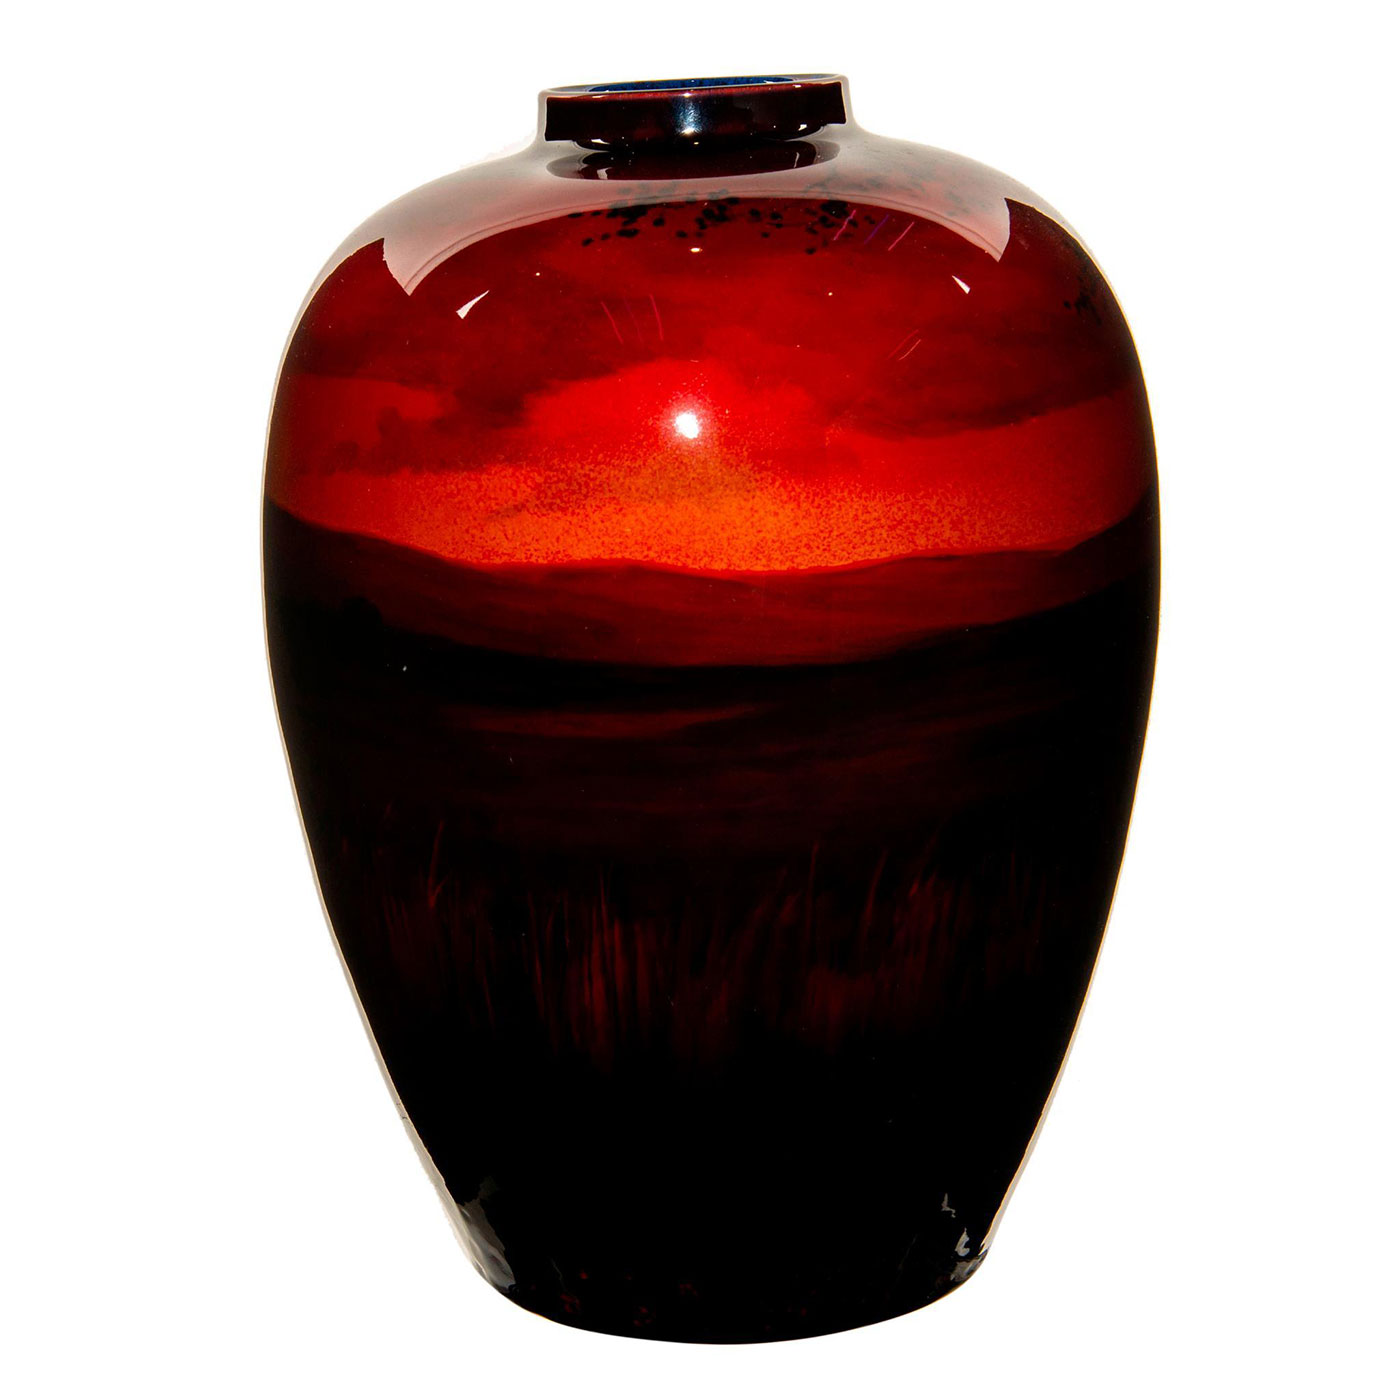 Royal Doulton Exhibition Sung Flambe Vase, River - Image 3 of 4